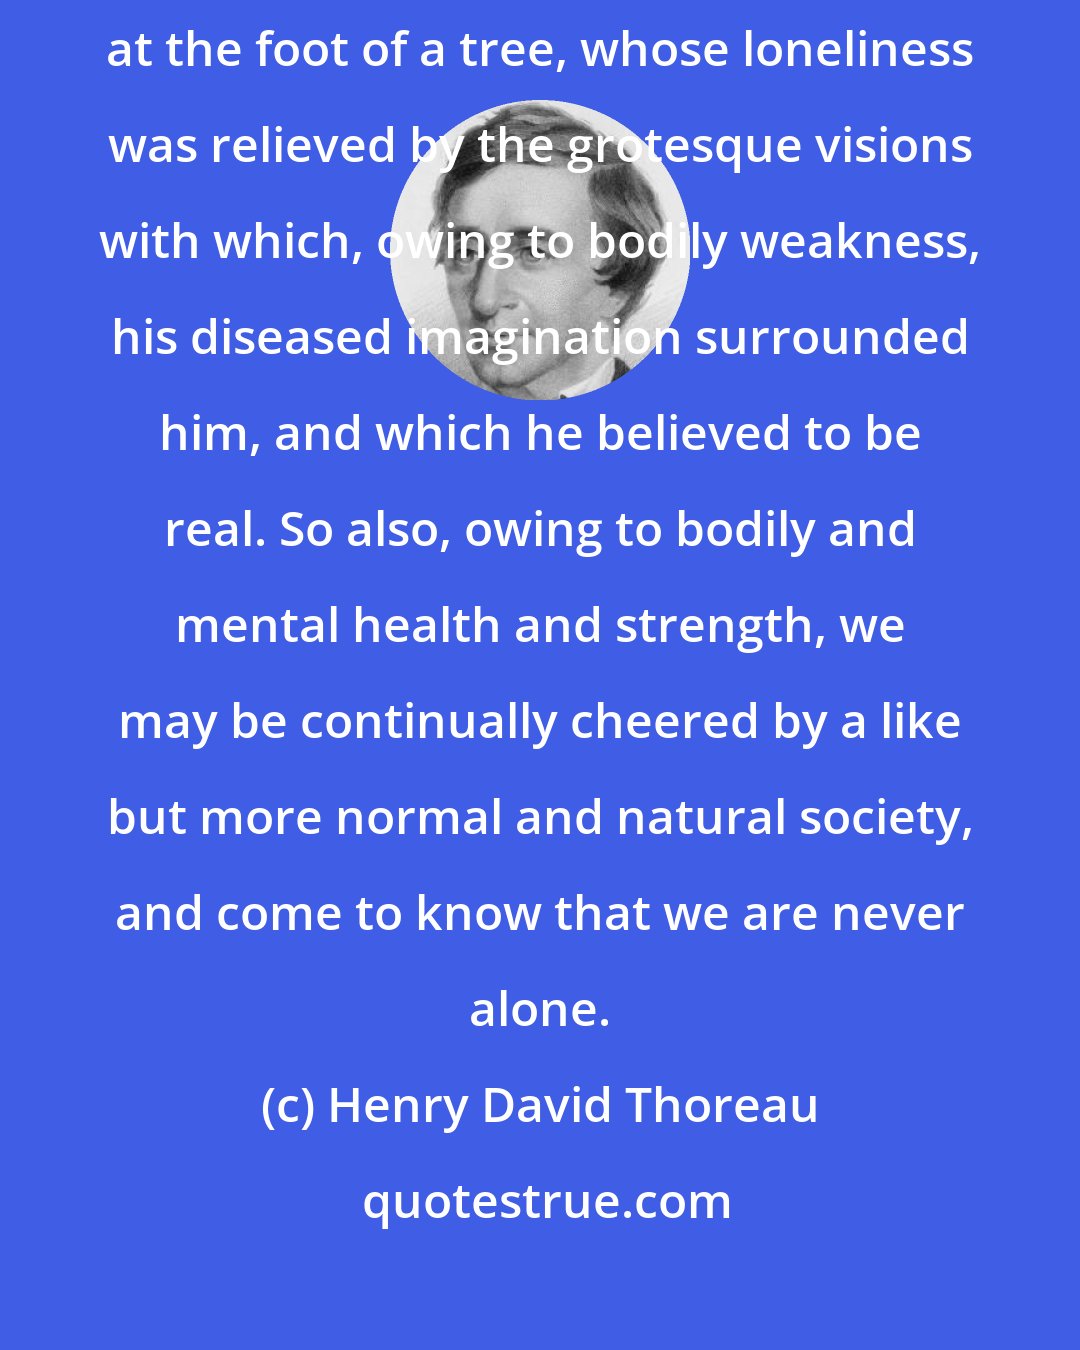 Henry David Thoreau: I have heard of a man lost in the woods and dying of famine and exhaustion at the foot of a tree, whose loneliness was relieved by the grotesque visions with which, owing to bodily weakness, his diseased imagination surrounded him, and which he believed to be real. So also, owing to bodily and mental health and strength, we may be continually cheered by a like but more normal and natural society, and come to know that we are never alone.